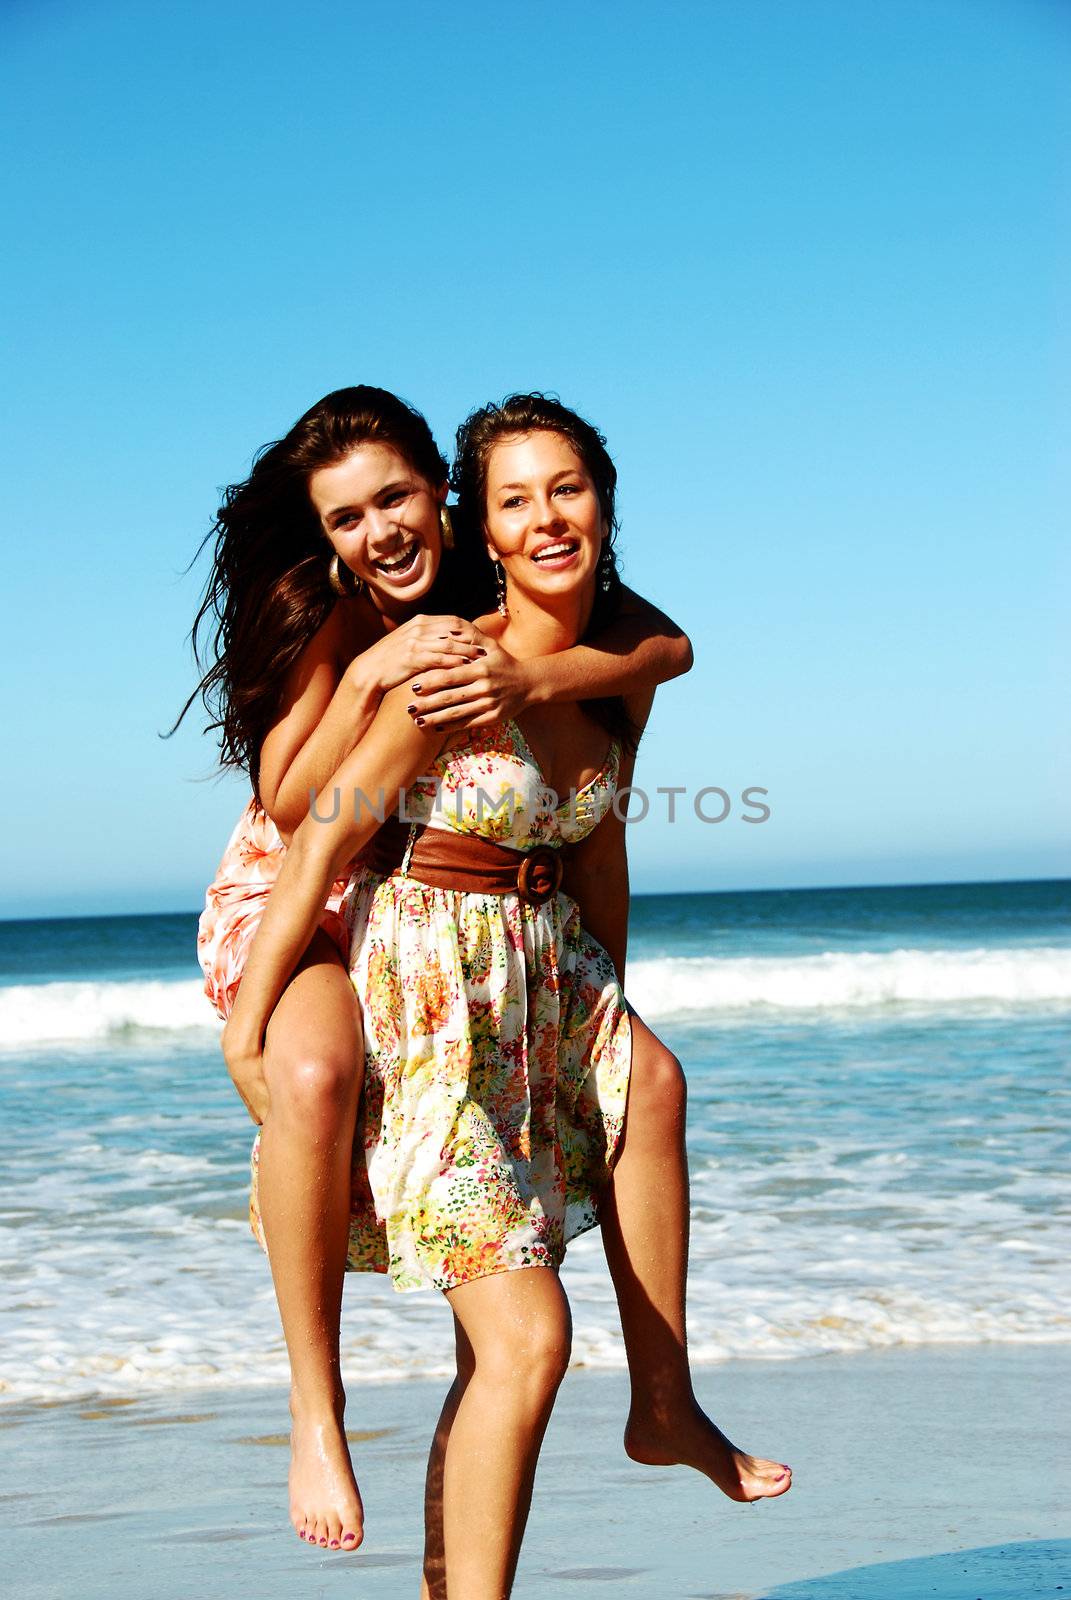 Two young woman having fun on the beach on a summer day by tish1